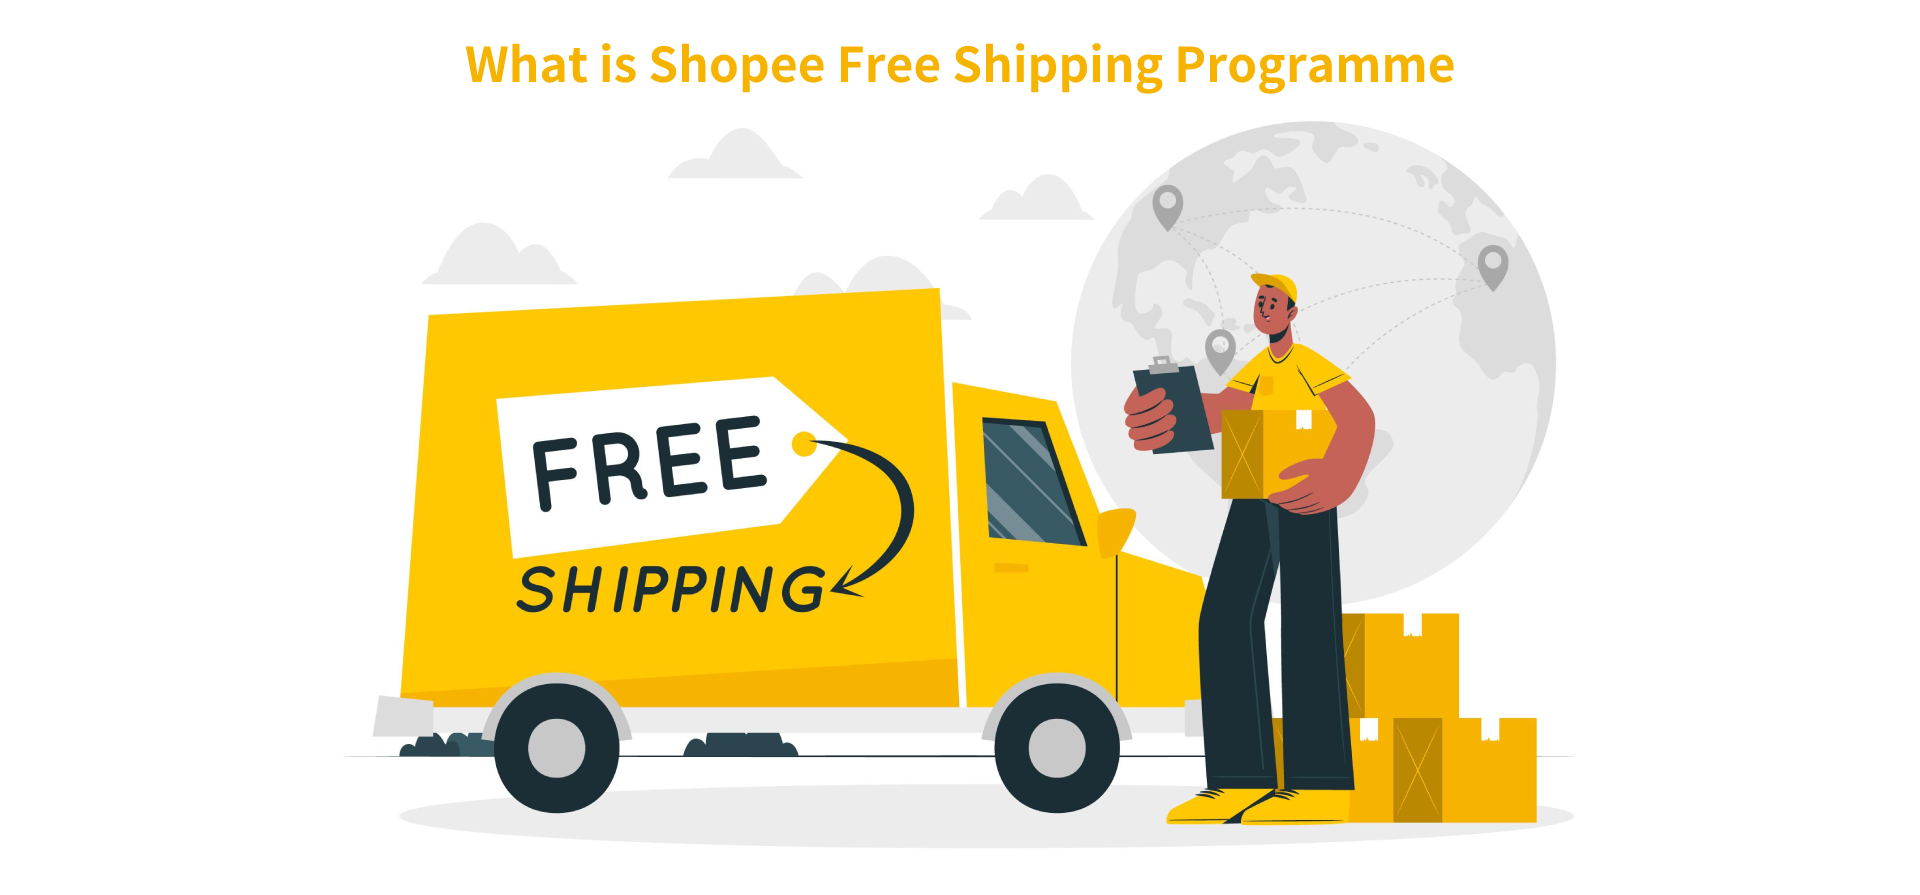  What is Shopee Free Shipping Programme